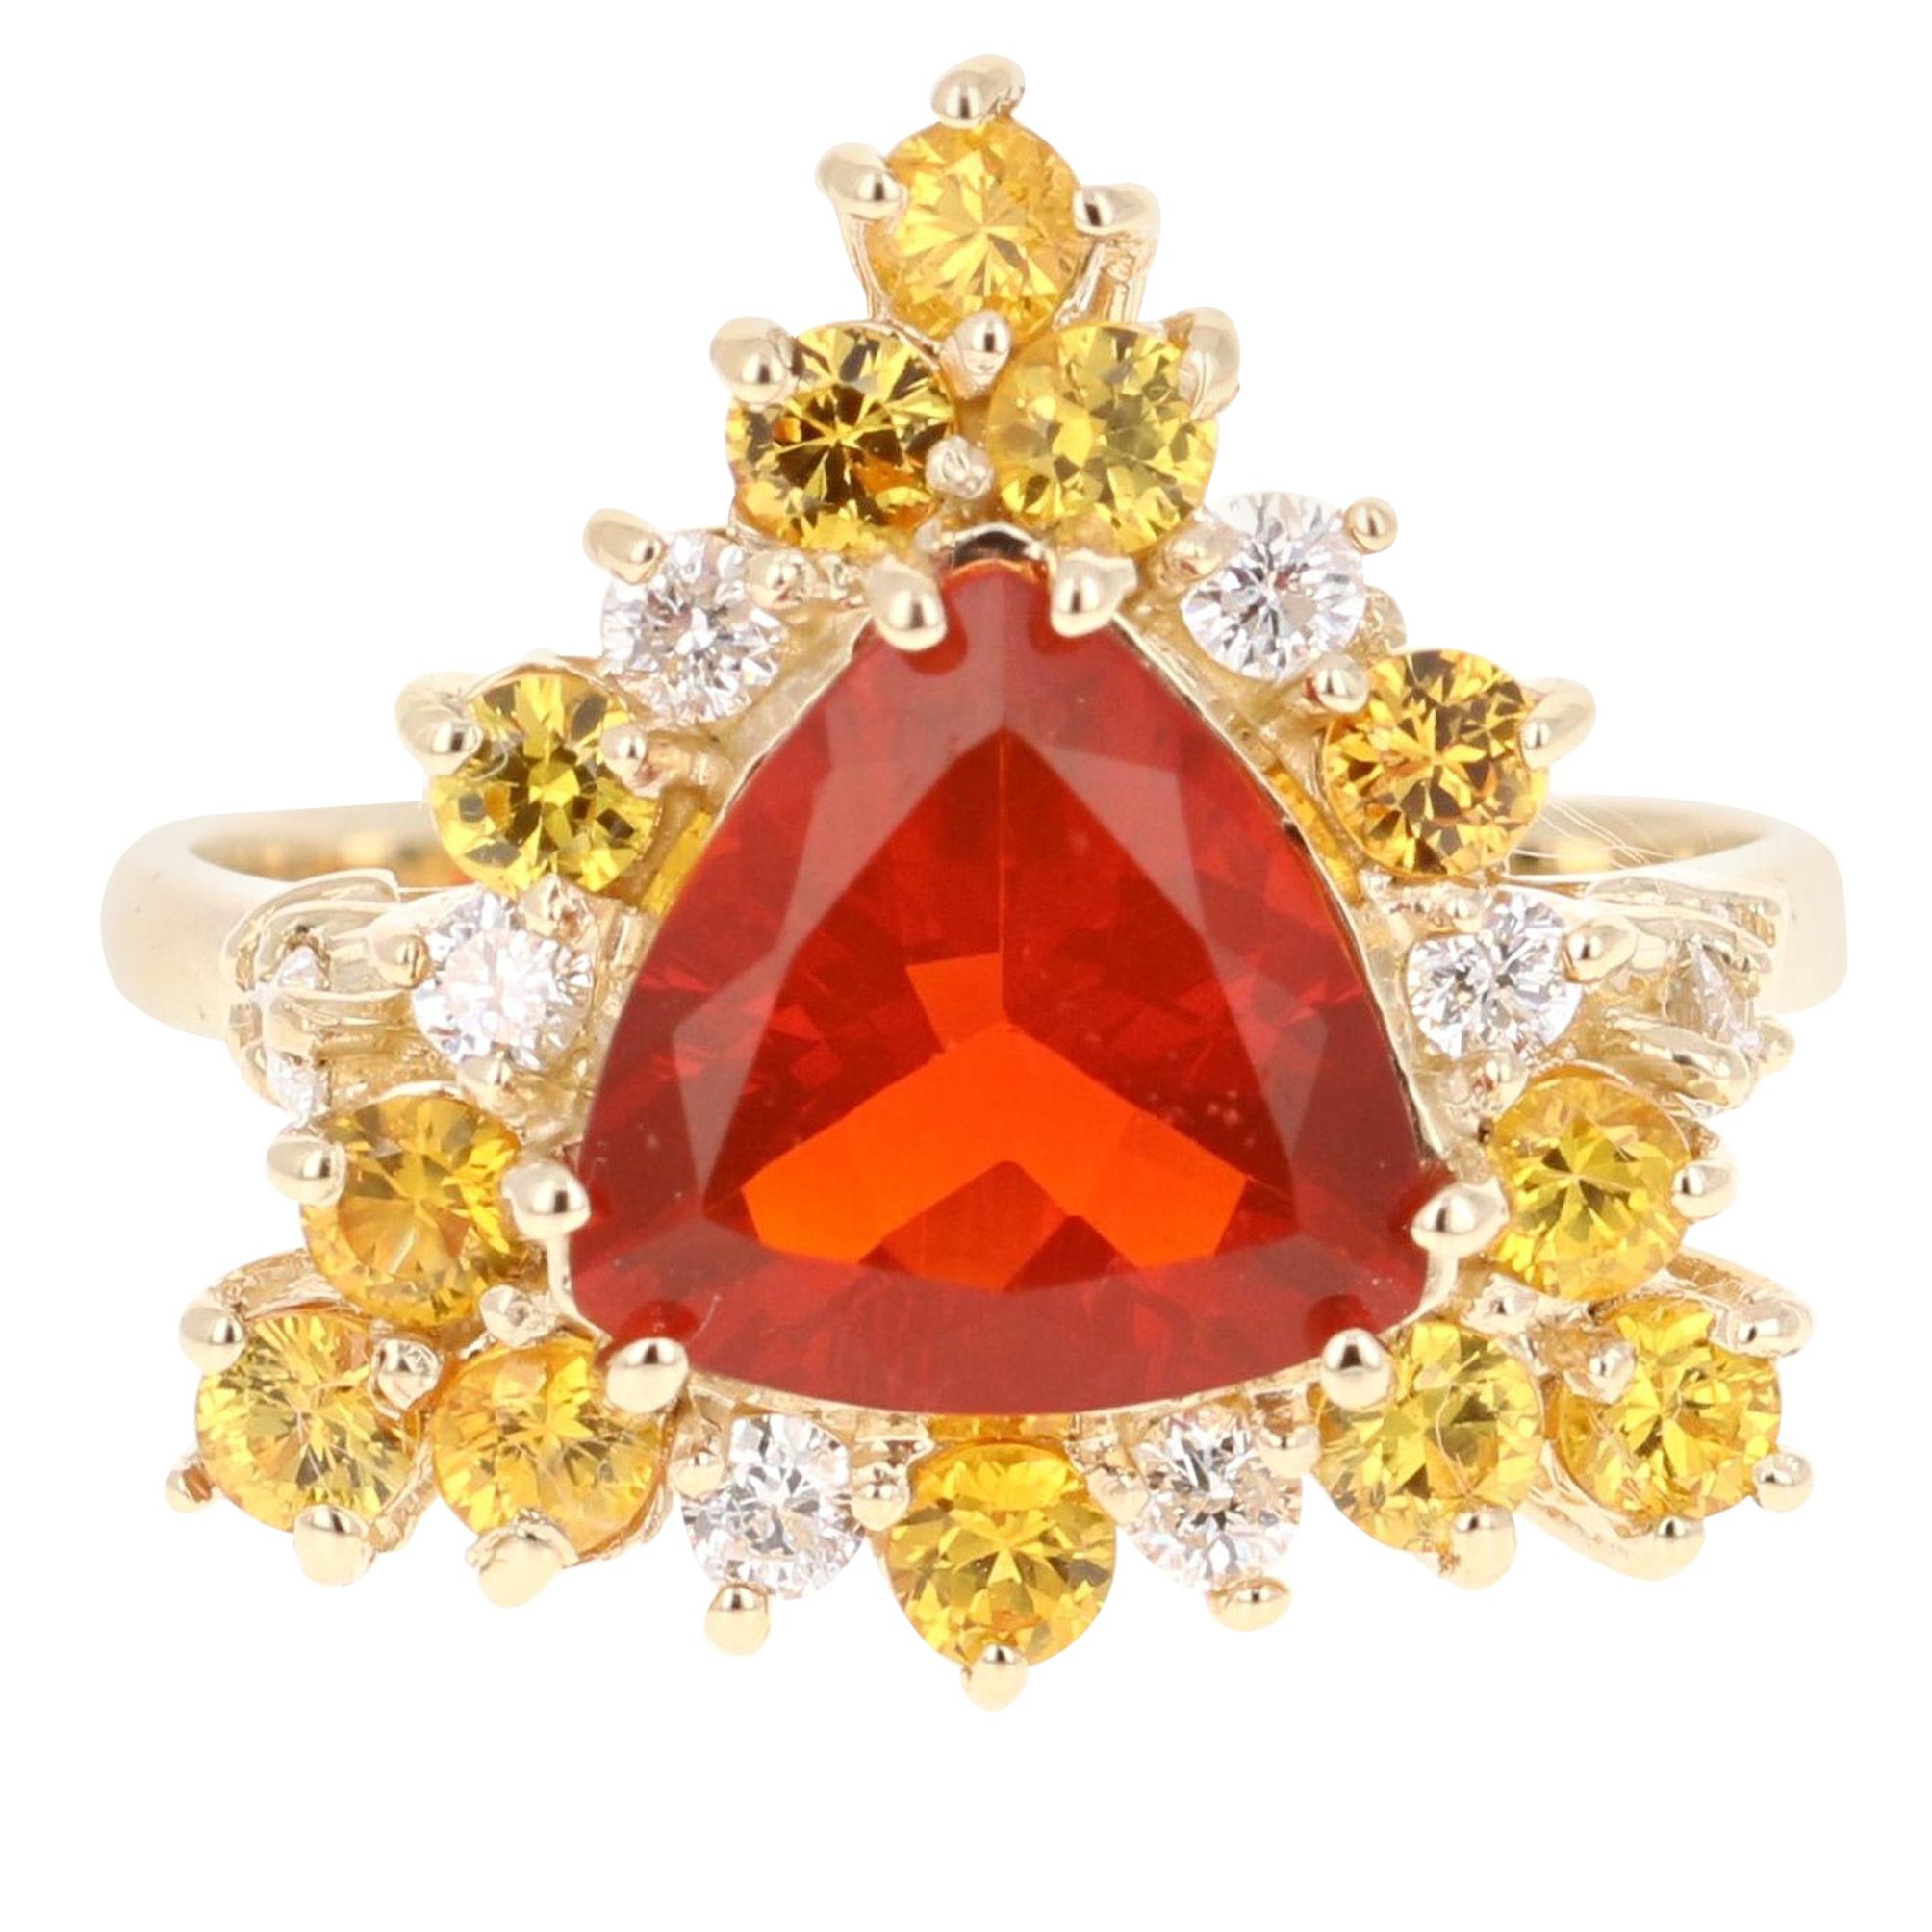 Beautiful Fire Opal, Yellow Sapphire and Diamond Ring!

This uniquely designed ring has a 1.50 carat Trillion Cut Fire Opal in the center of the ring.  The Fire Opal is surrounded by alternating 12 Round Cut Yellow Sapphires that weigh 0.90 carats